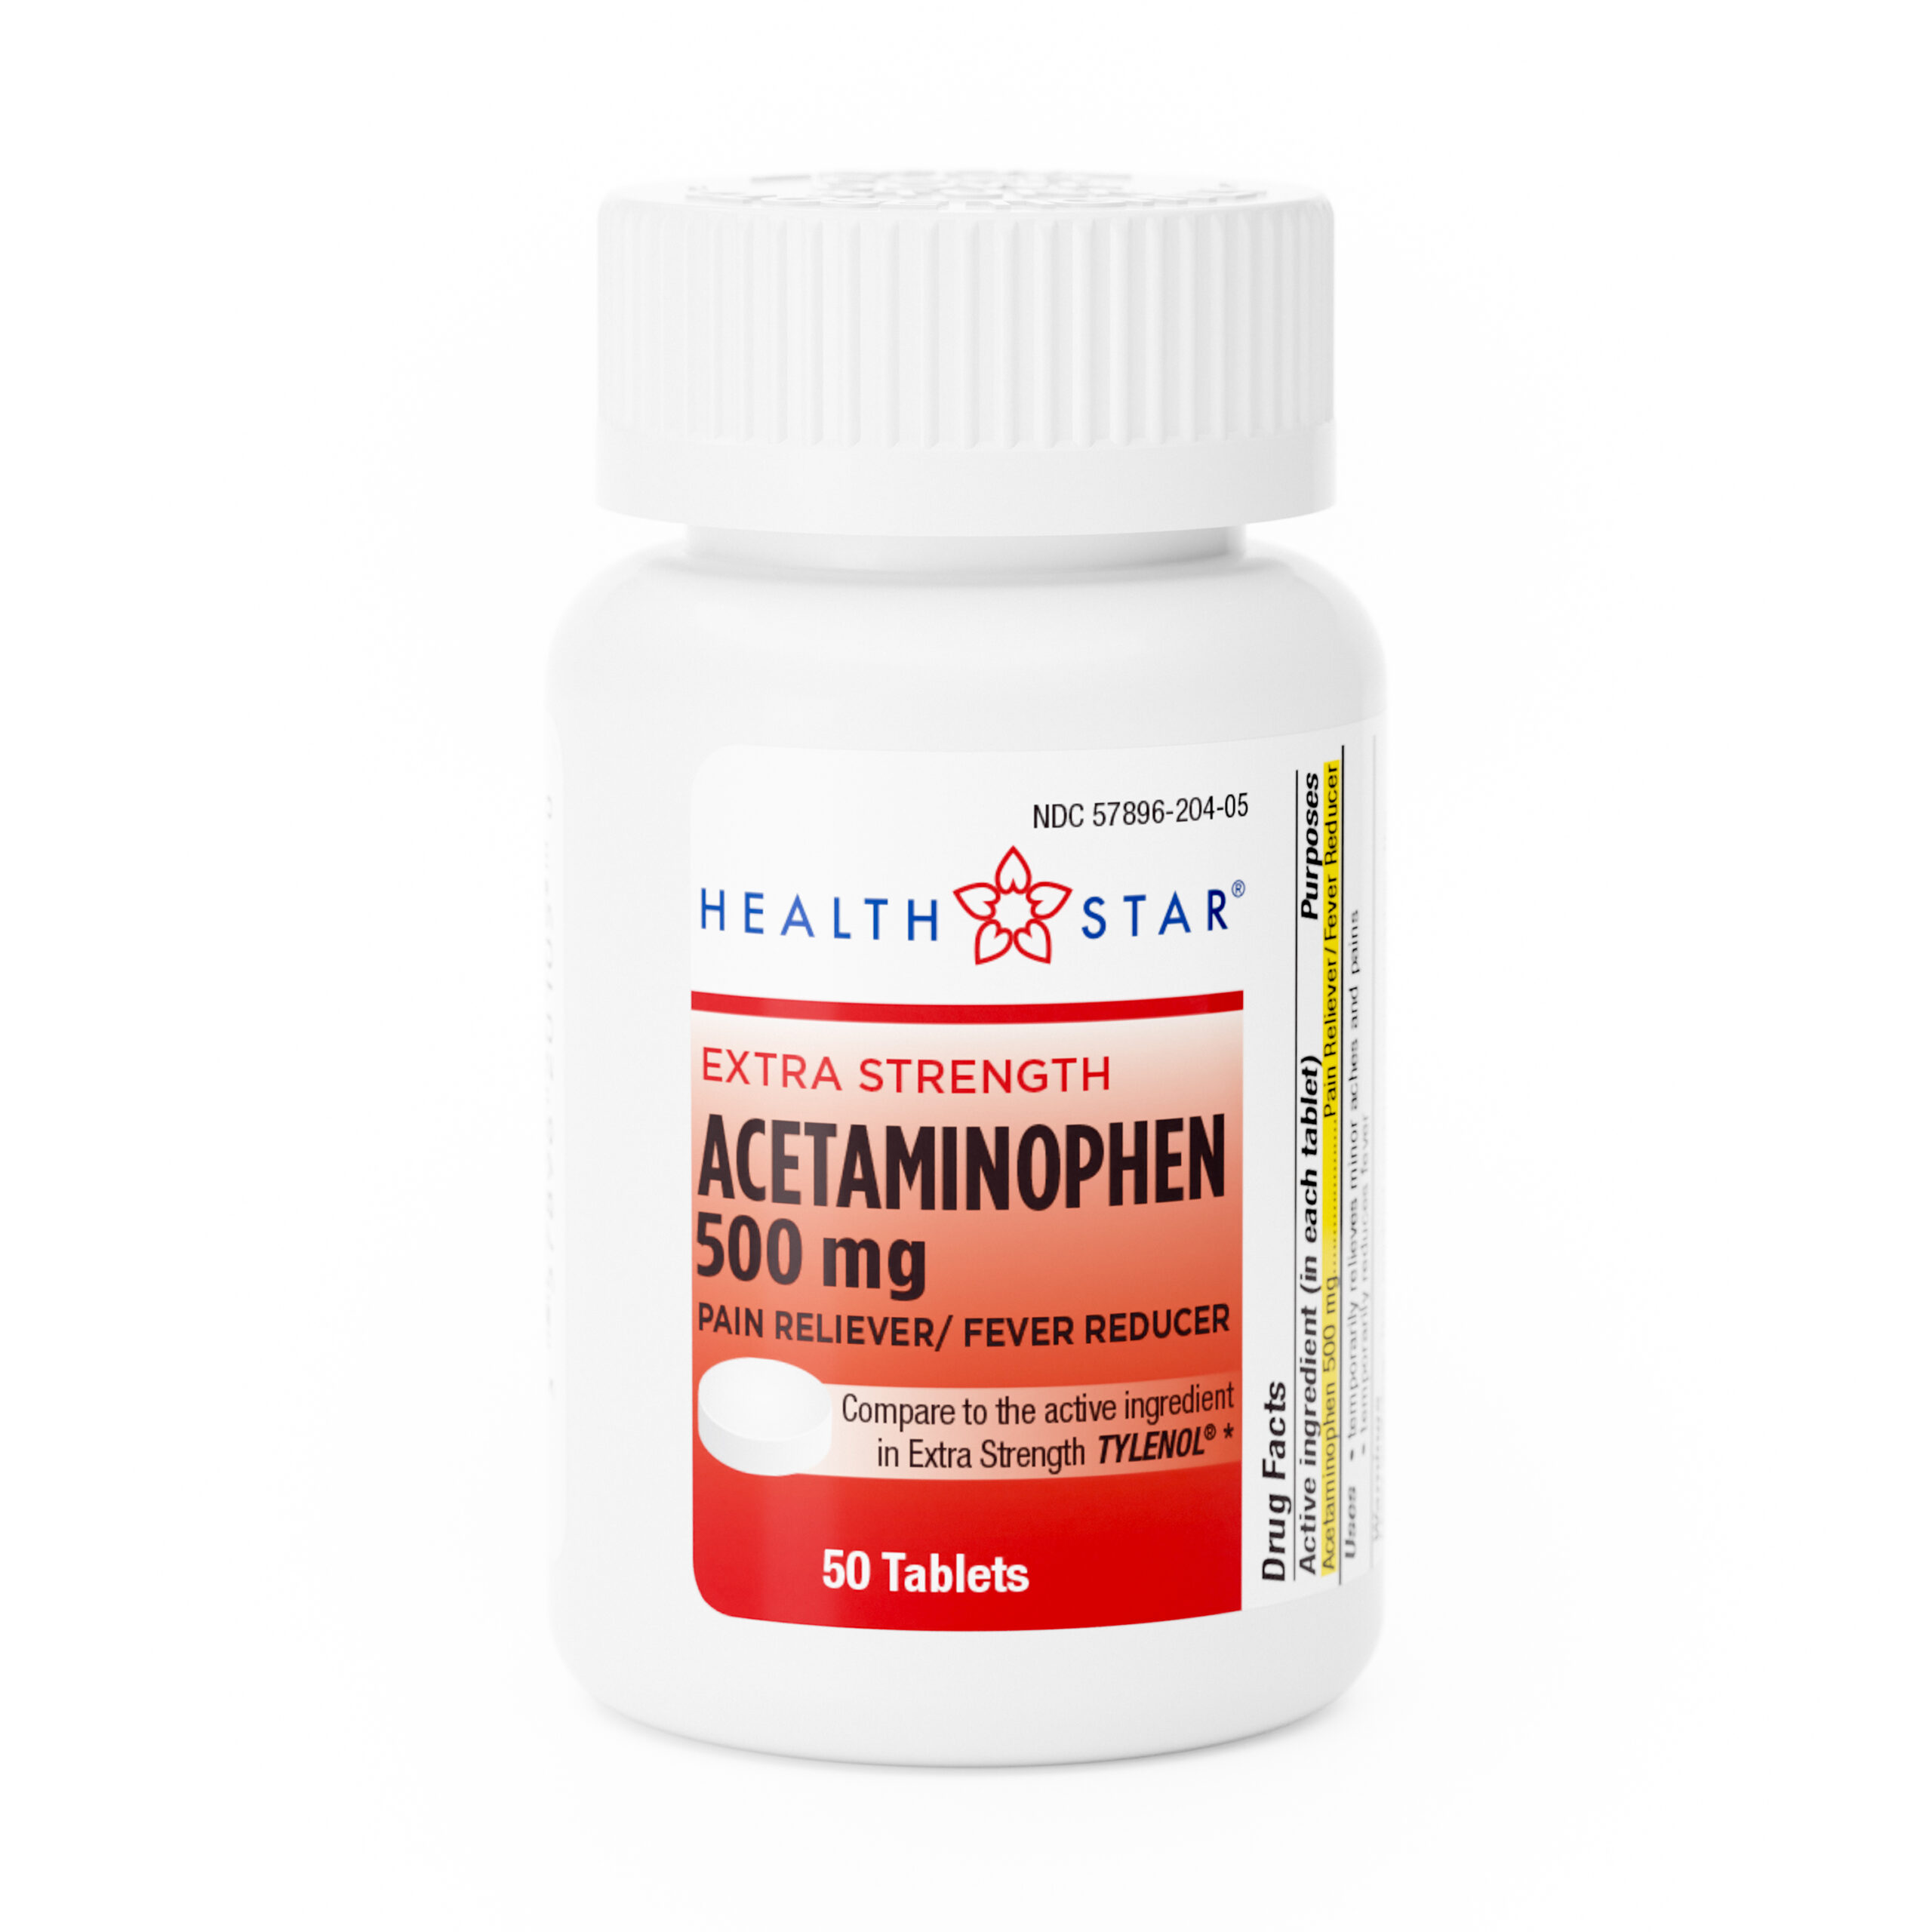 Extra Strength Acetaminophen – 50 Tablets